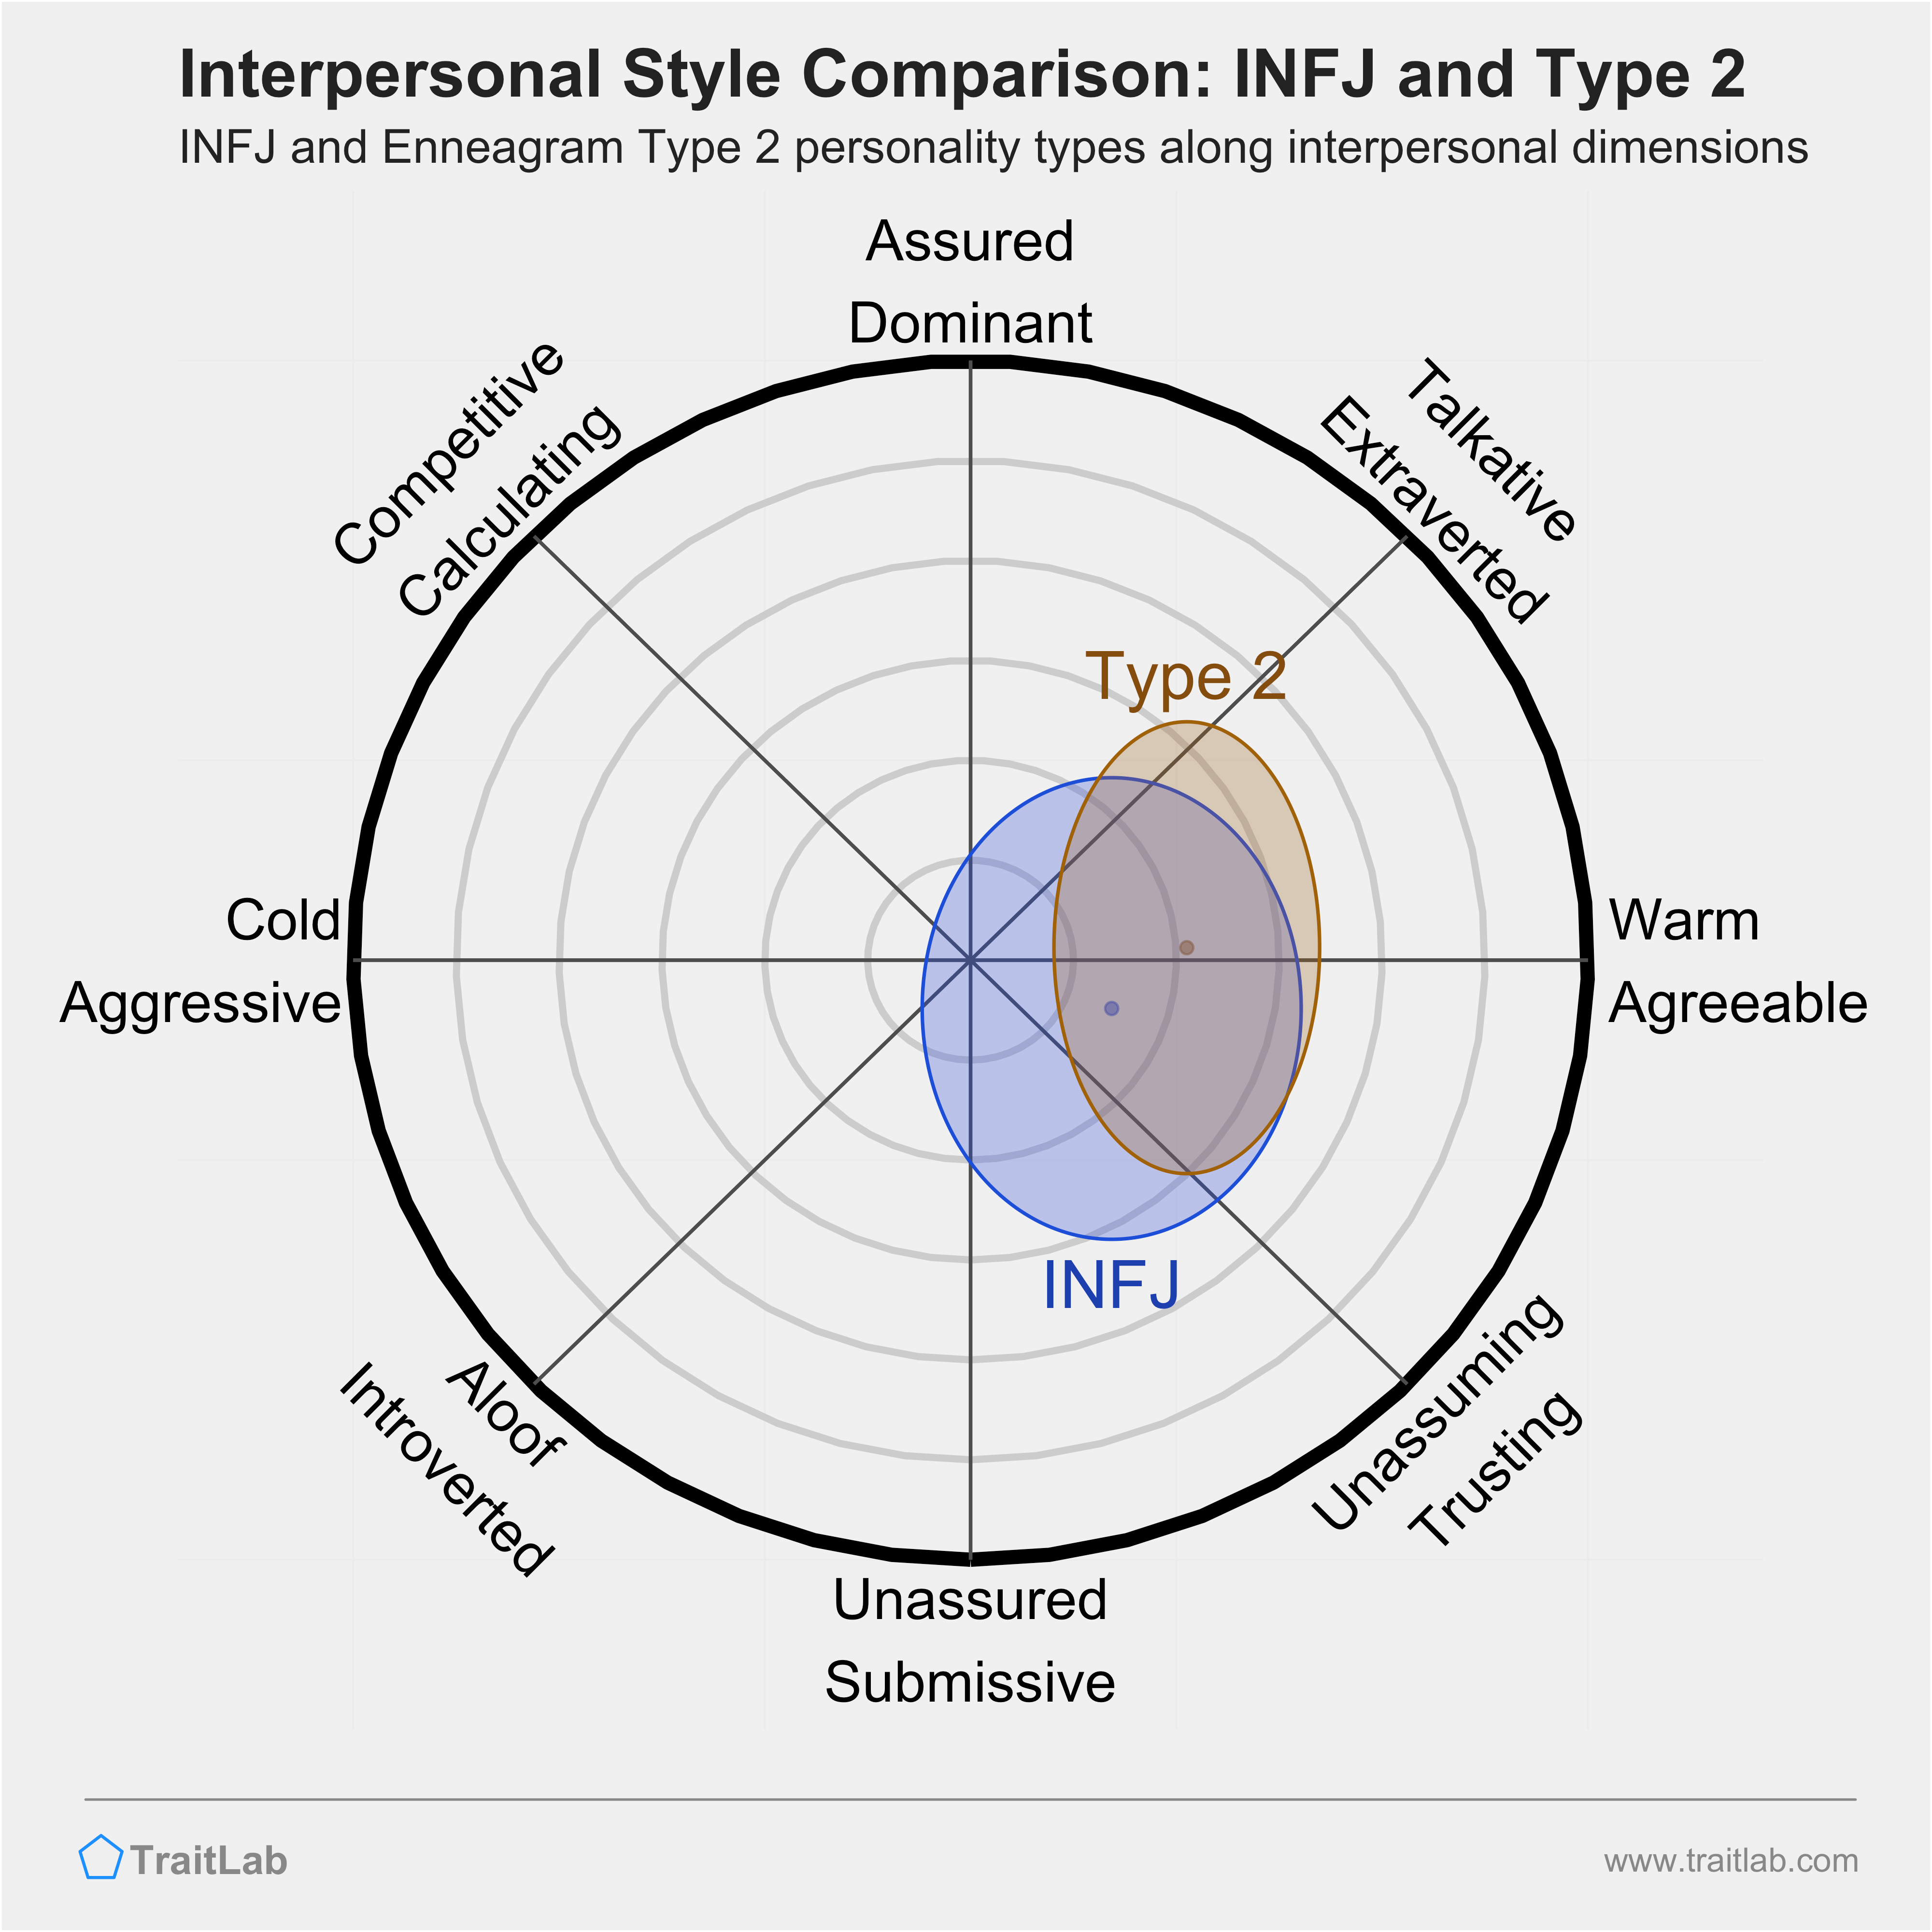 Enneagram INFJ and Type 2 comparison across interpersonal dimensions